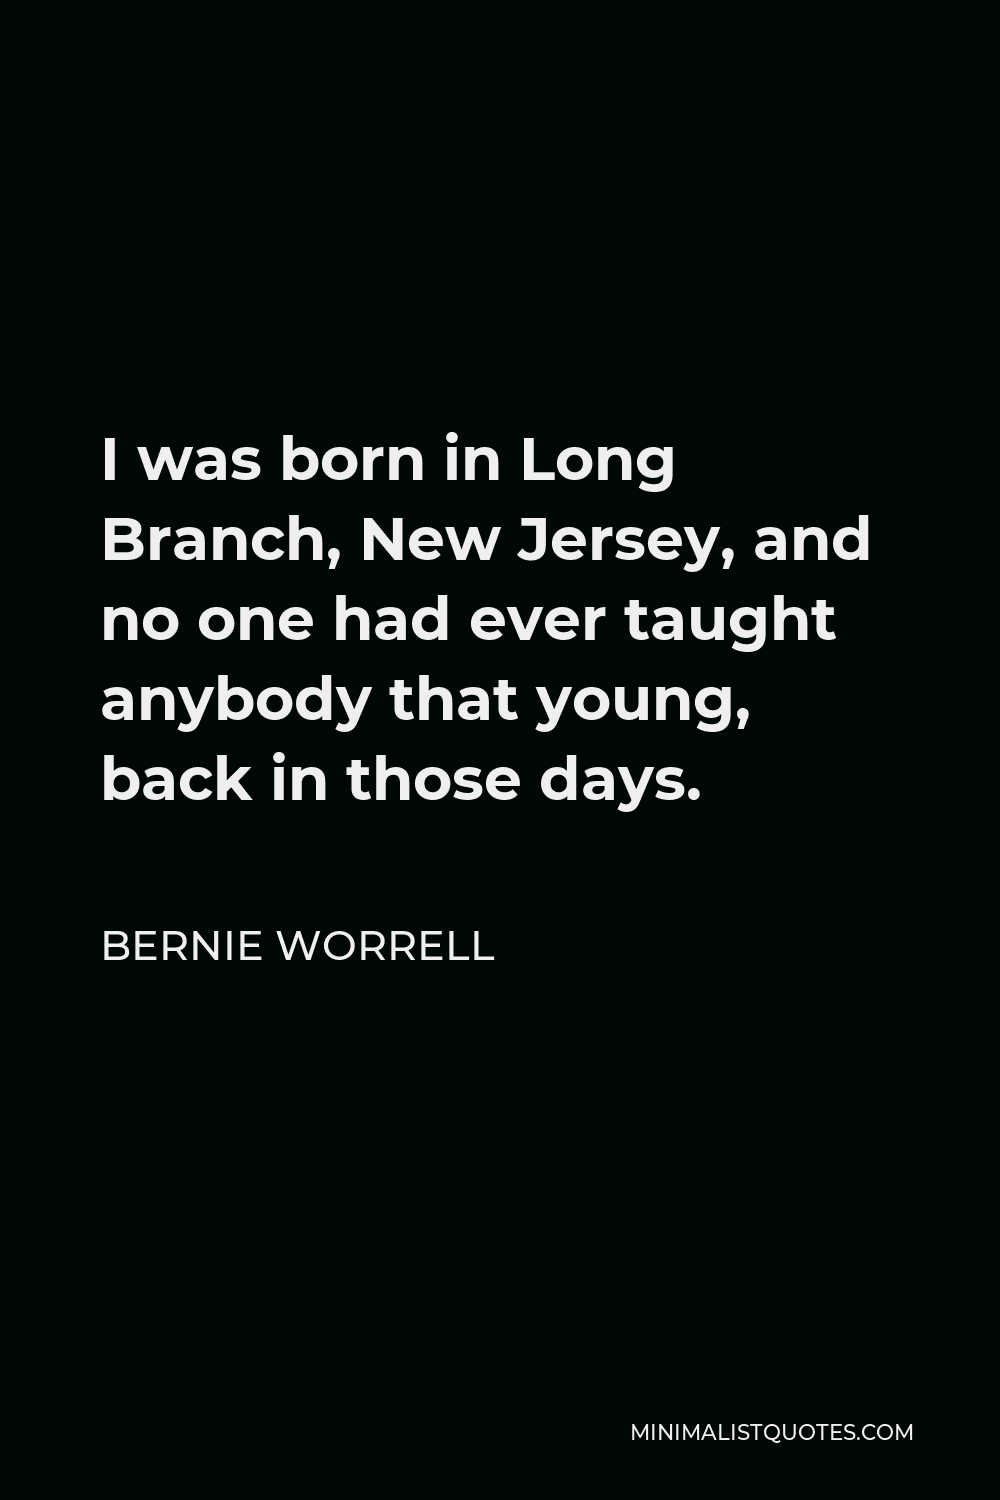 Bernie Worrell Quote - I was born in Long Branch, New Jersey, and no one had ever taught anybody that young, back in those days.